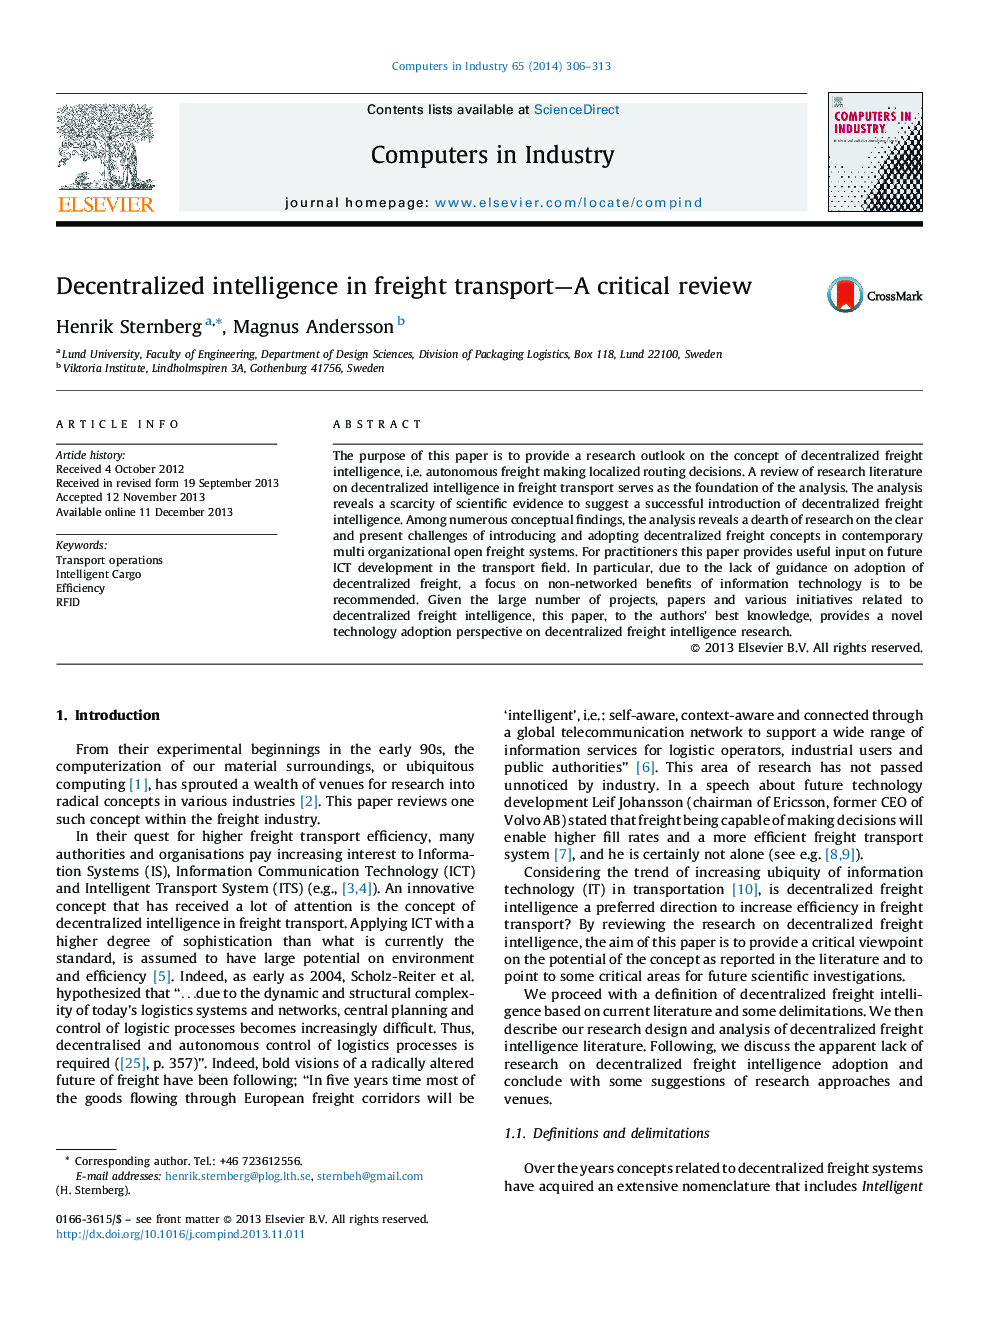 Decentralized intelligence in freight transport—A critical review